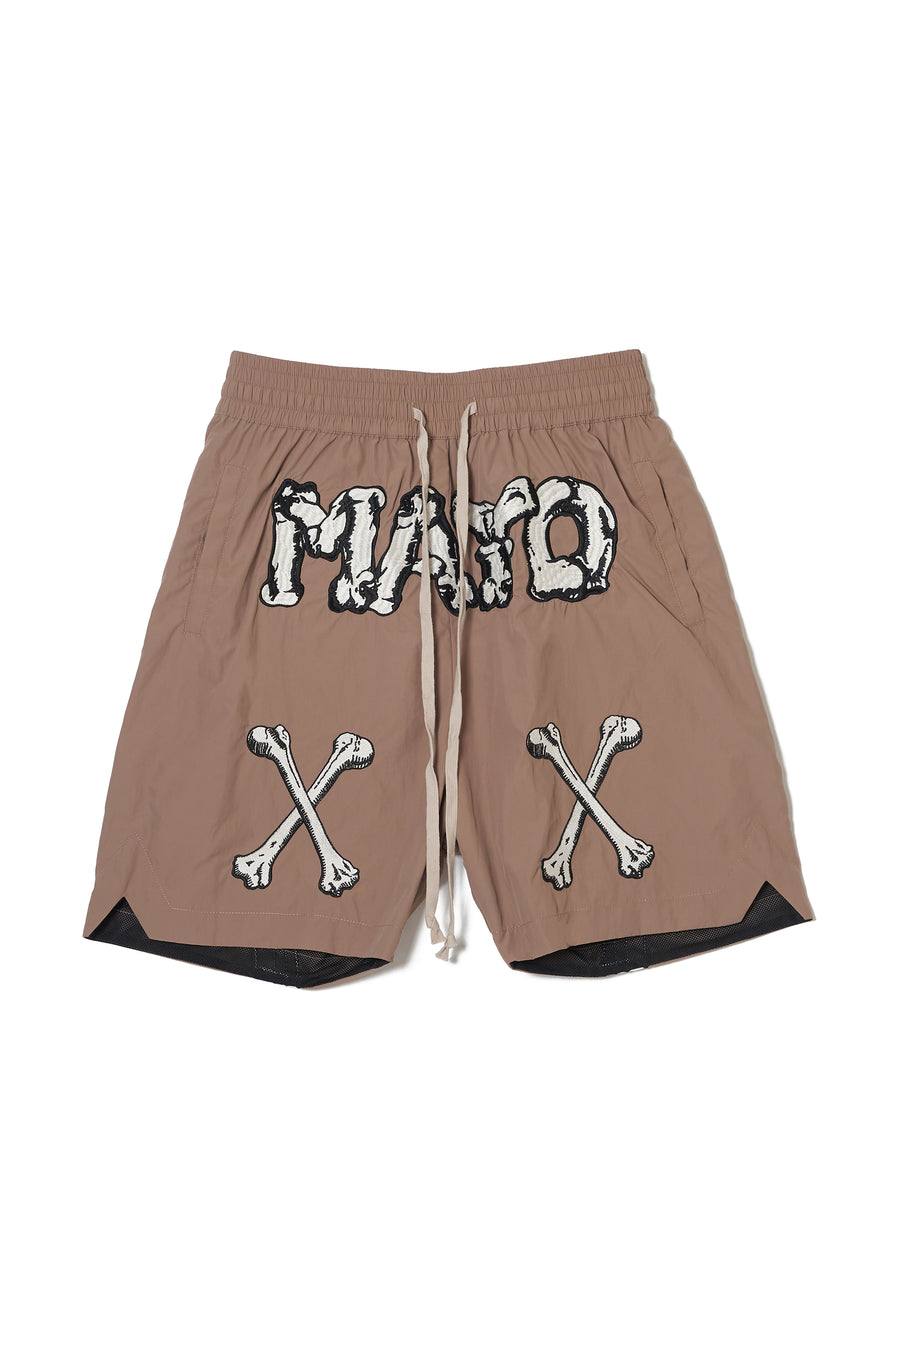 [Sales start in mid-March] MAYO BONES Embroidery Shorts - BEIGE